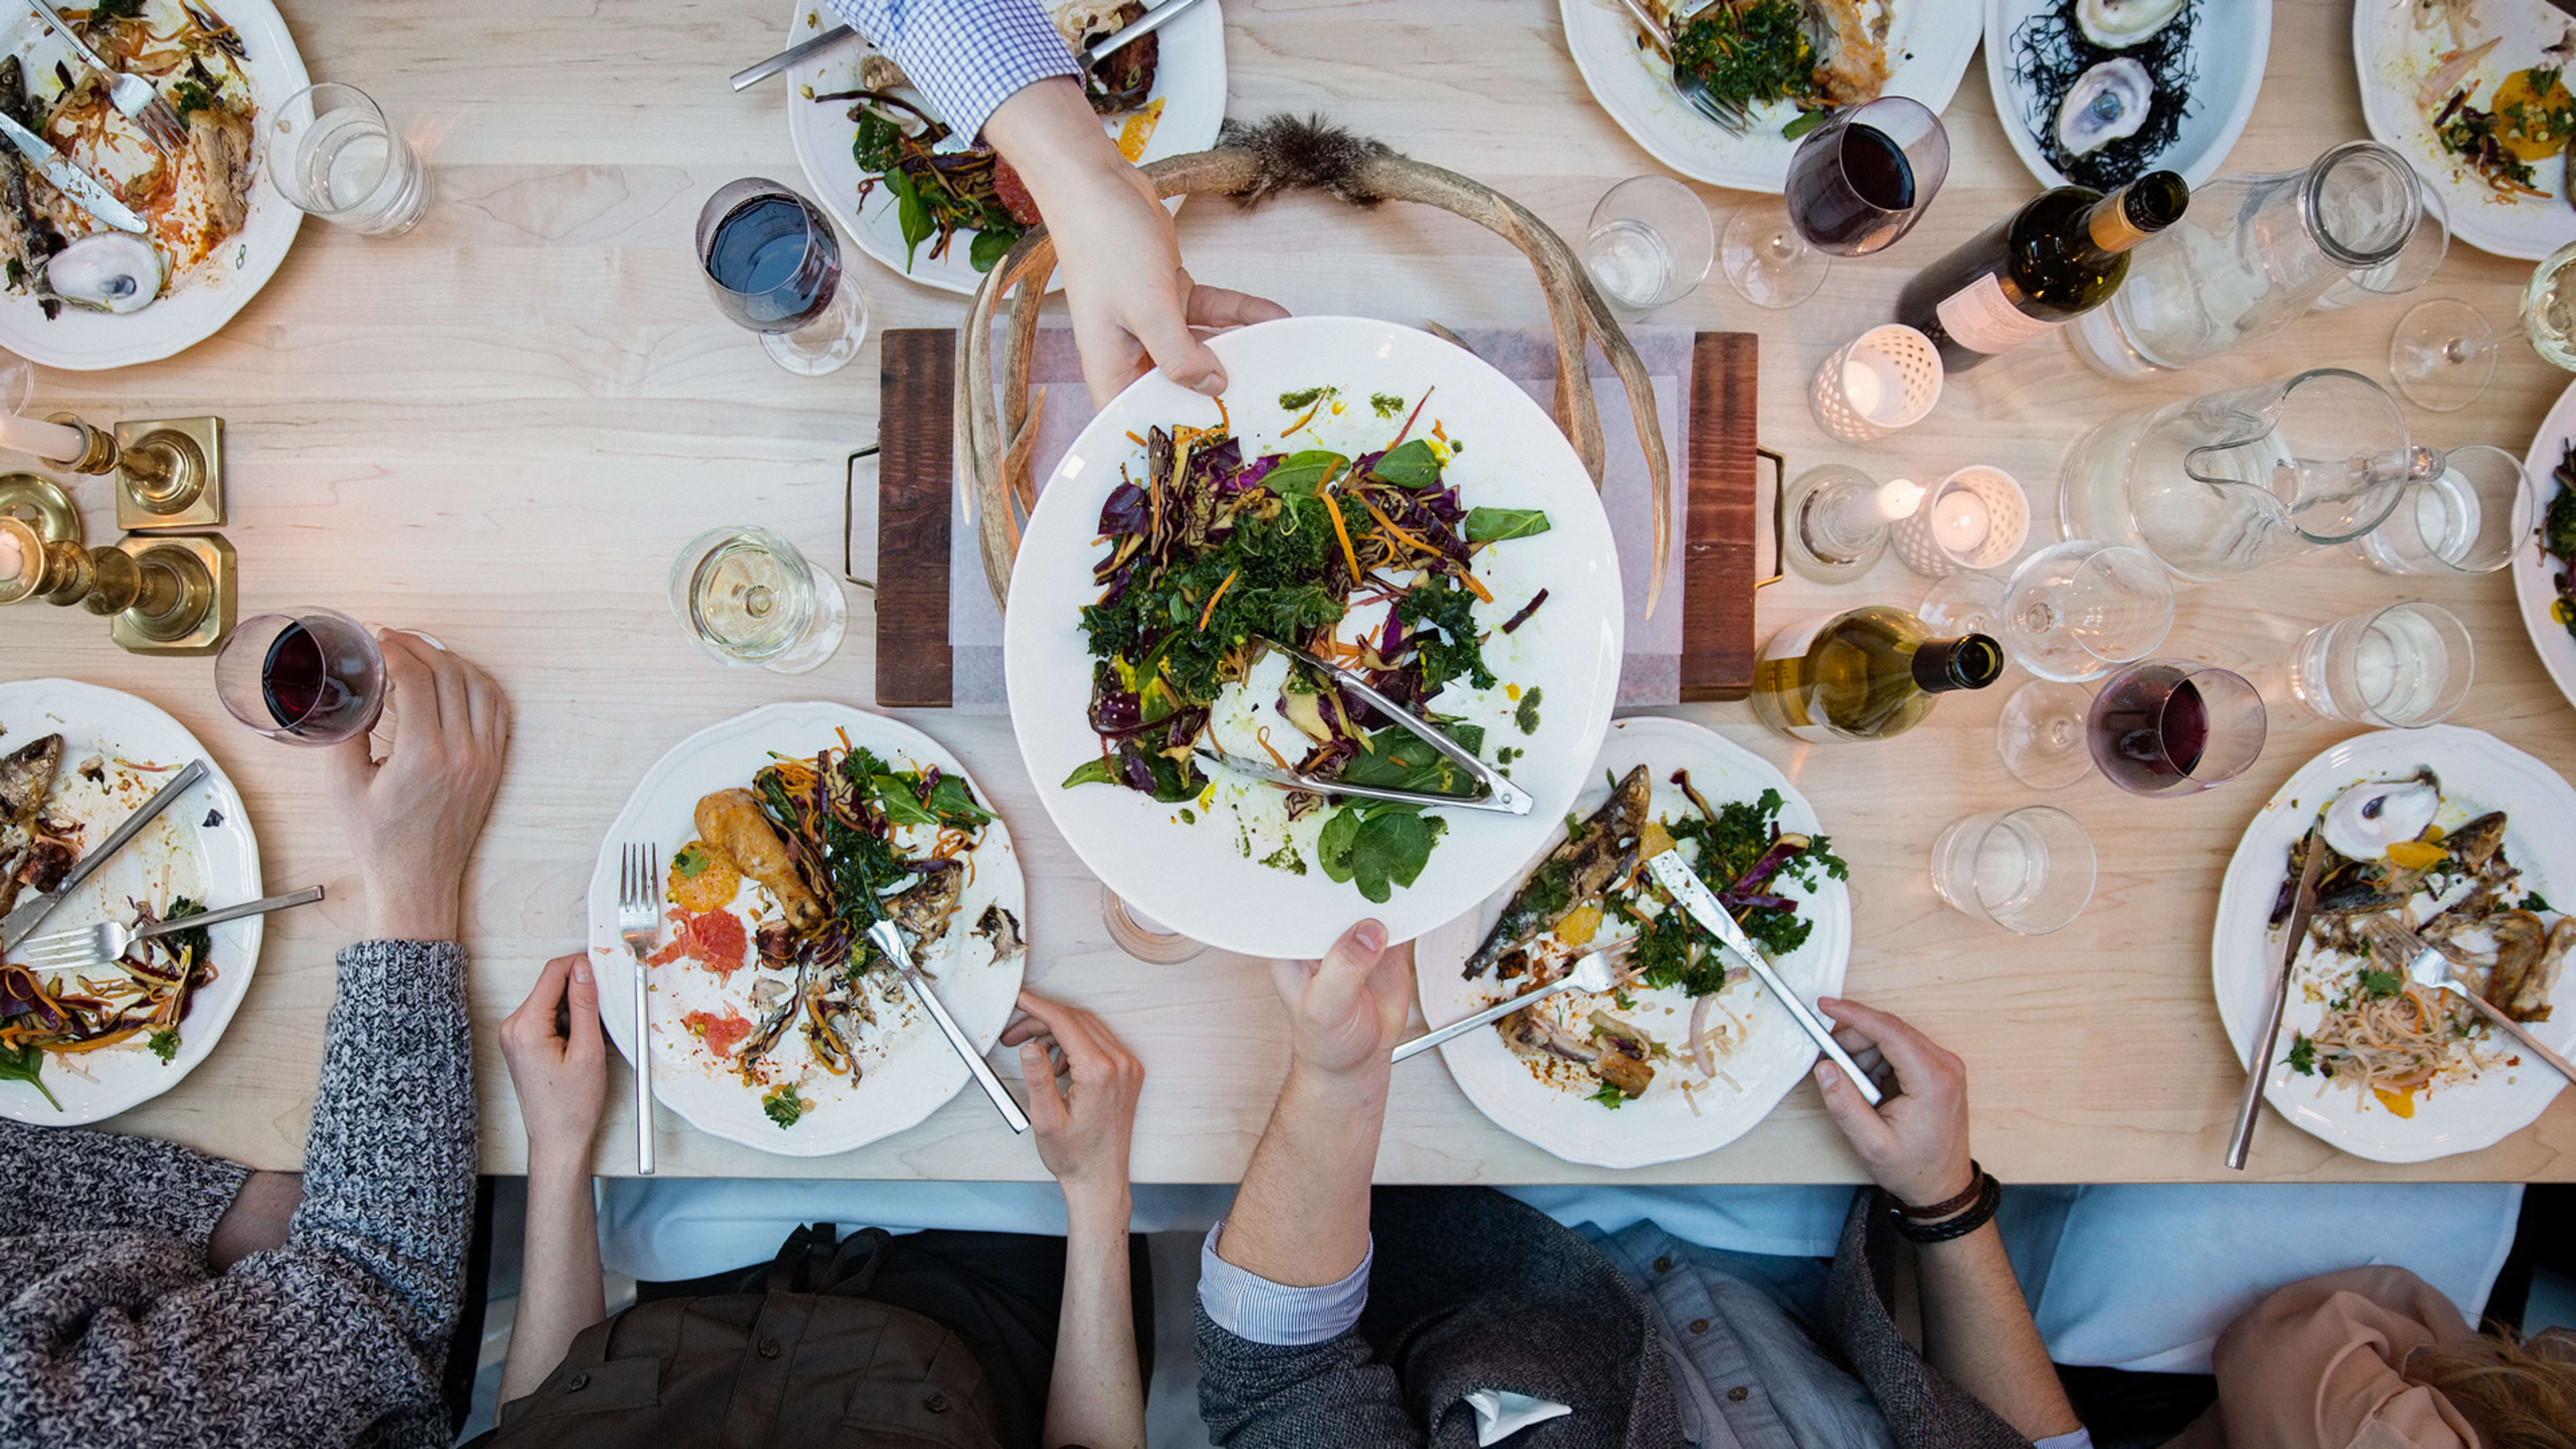 GroupRaise Wants You To Make A Donation With Your Dinner Reservation